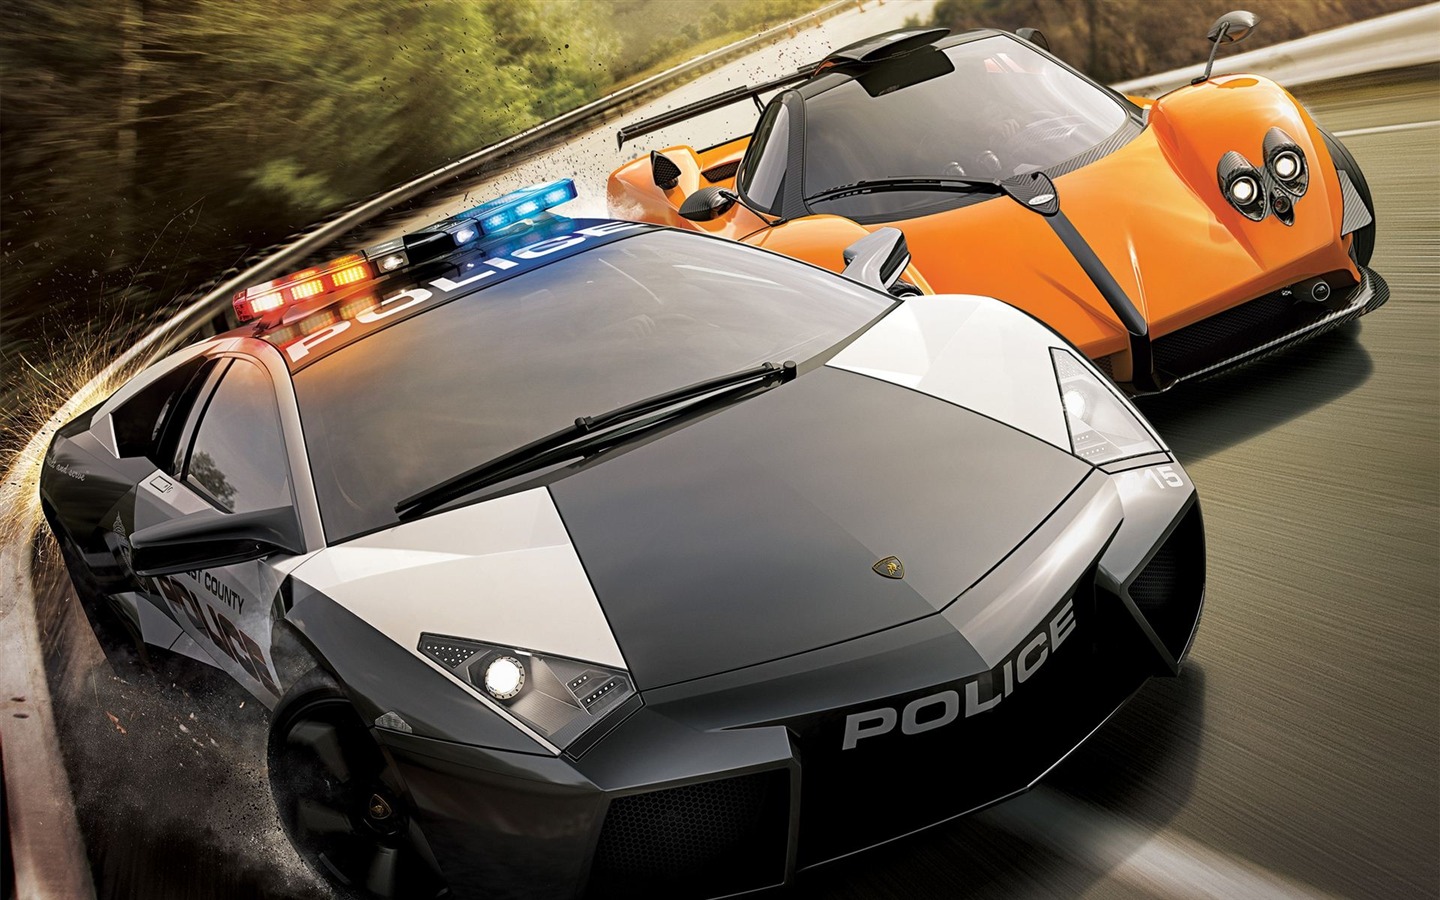 Need for Speed: Hot Pursuit 極品飛車14：熱力追踪 #3 - 1440x900